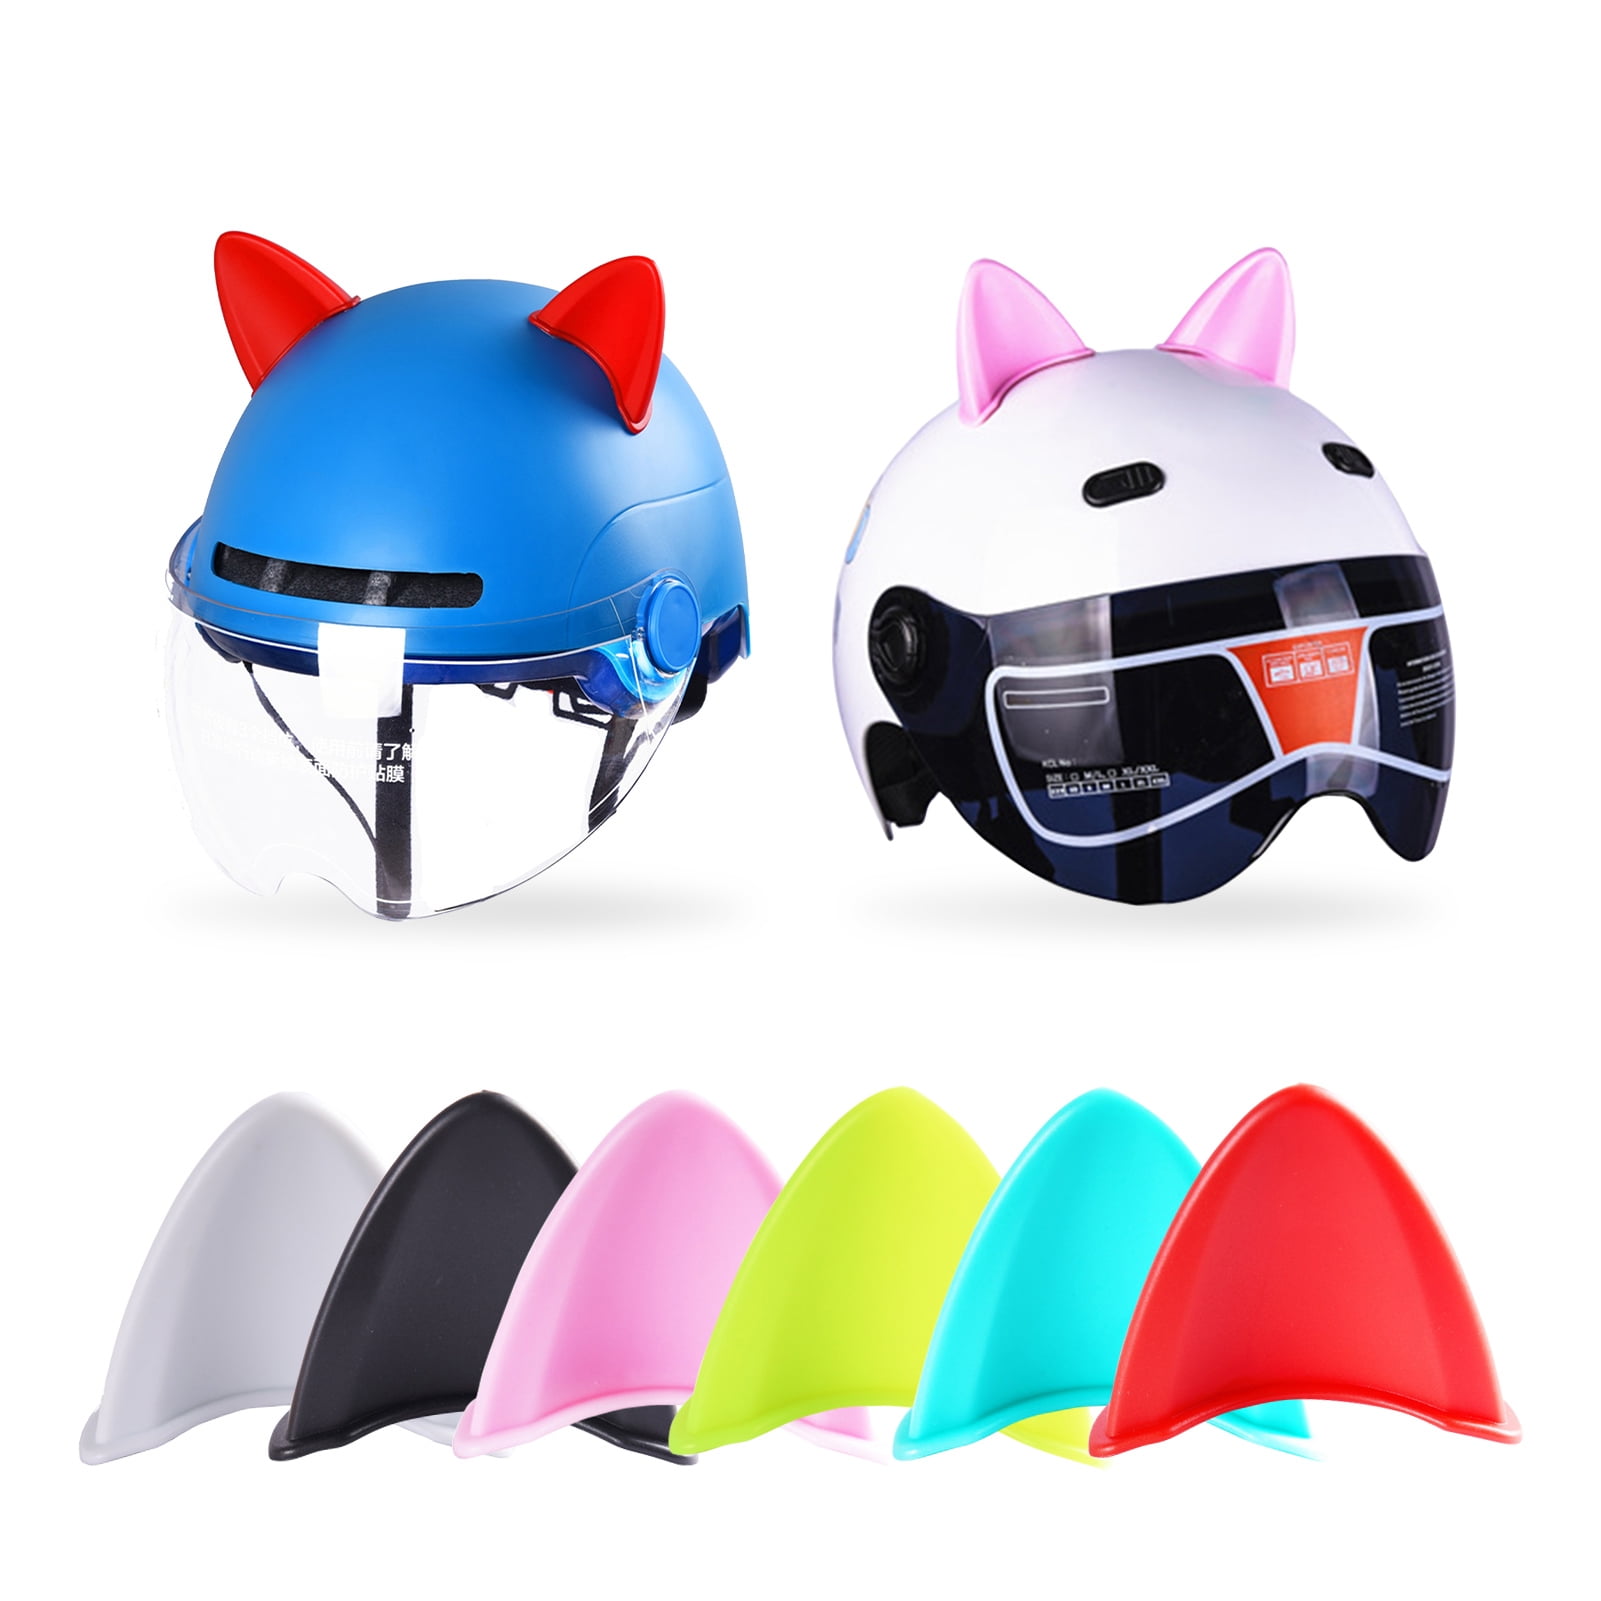 Neither A Pair Of Cat Ears Helmet Ornament Cute Self Adhesive Personalized Motorcycle Accessories,universal Helmet Cover Sticky Hook Great for Motorbike Bicycle Headwear Accessories